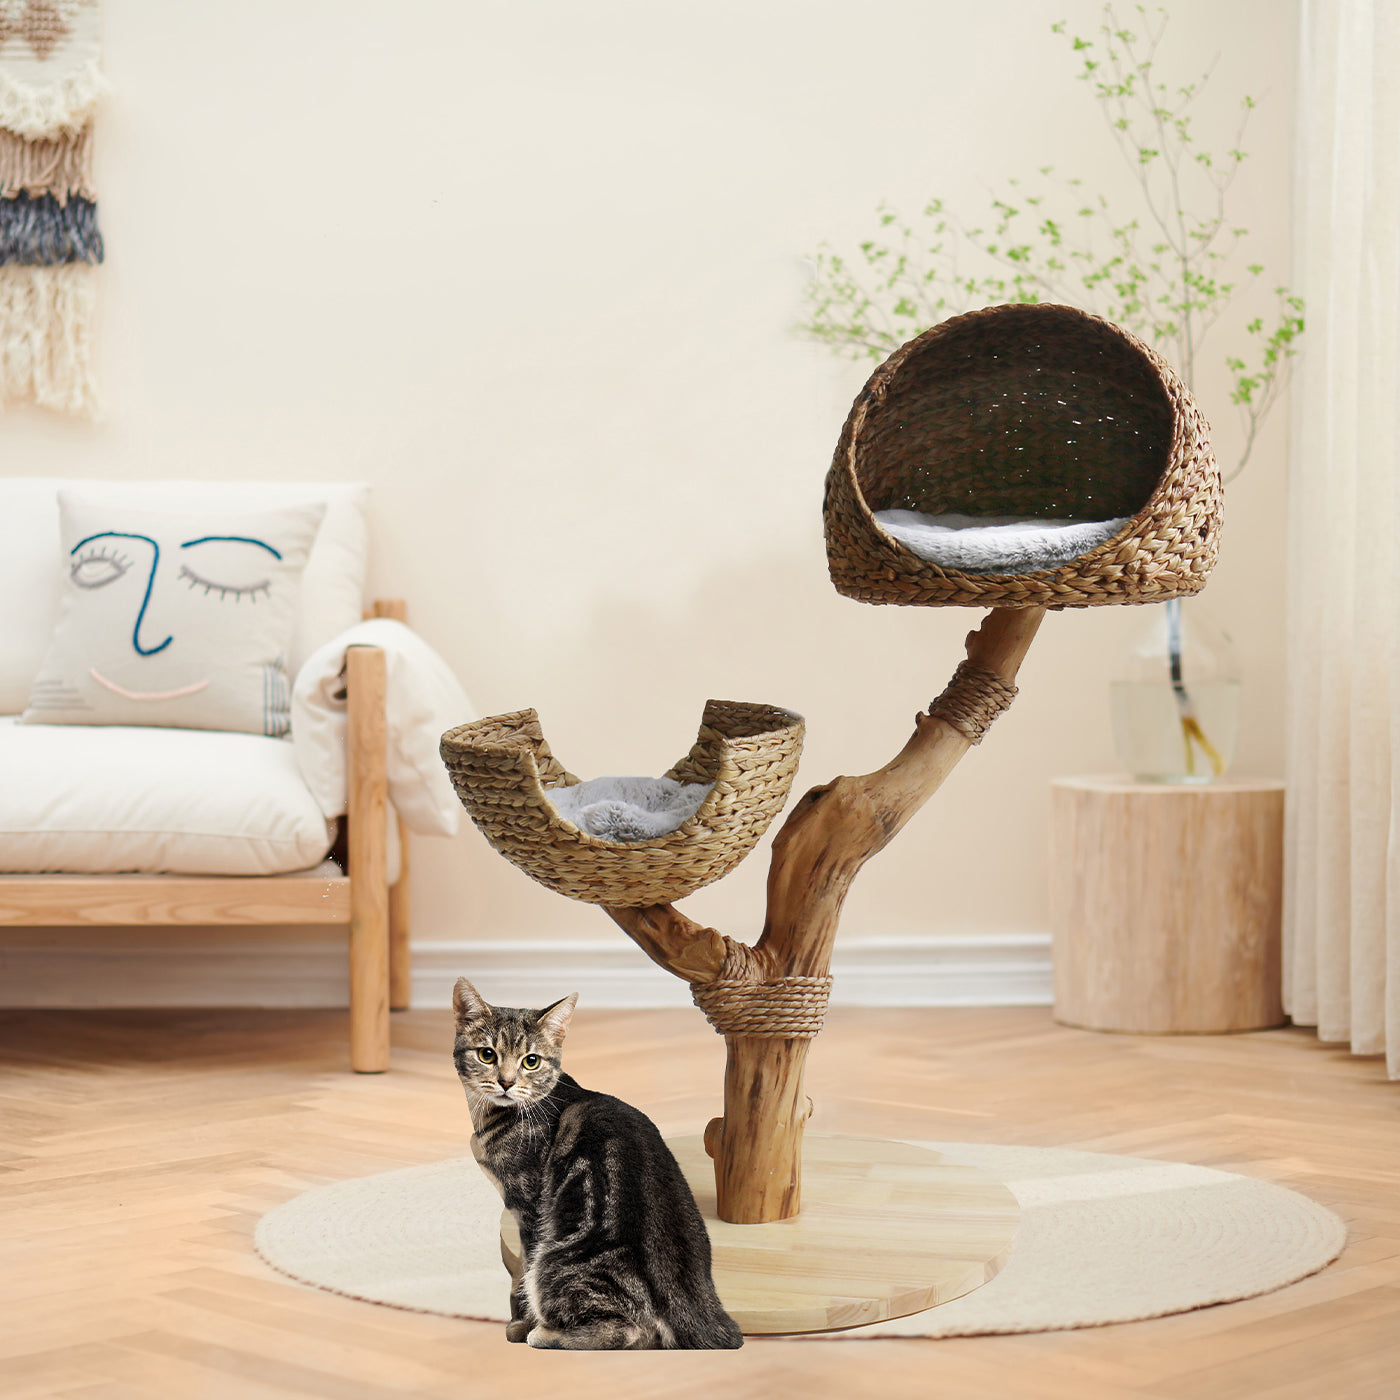 Discover our Luxury Back to Nature The Duo Scratch Post. Features Duo Bed for lounging and multiple cats, Thick Natural Wood Perfect For Scratching And Burrow! Available Now at Lords & Labradors